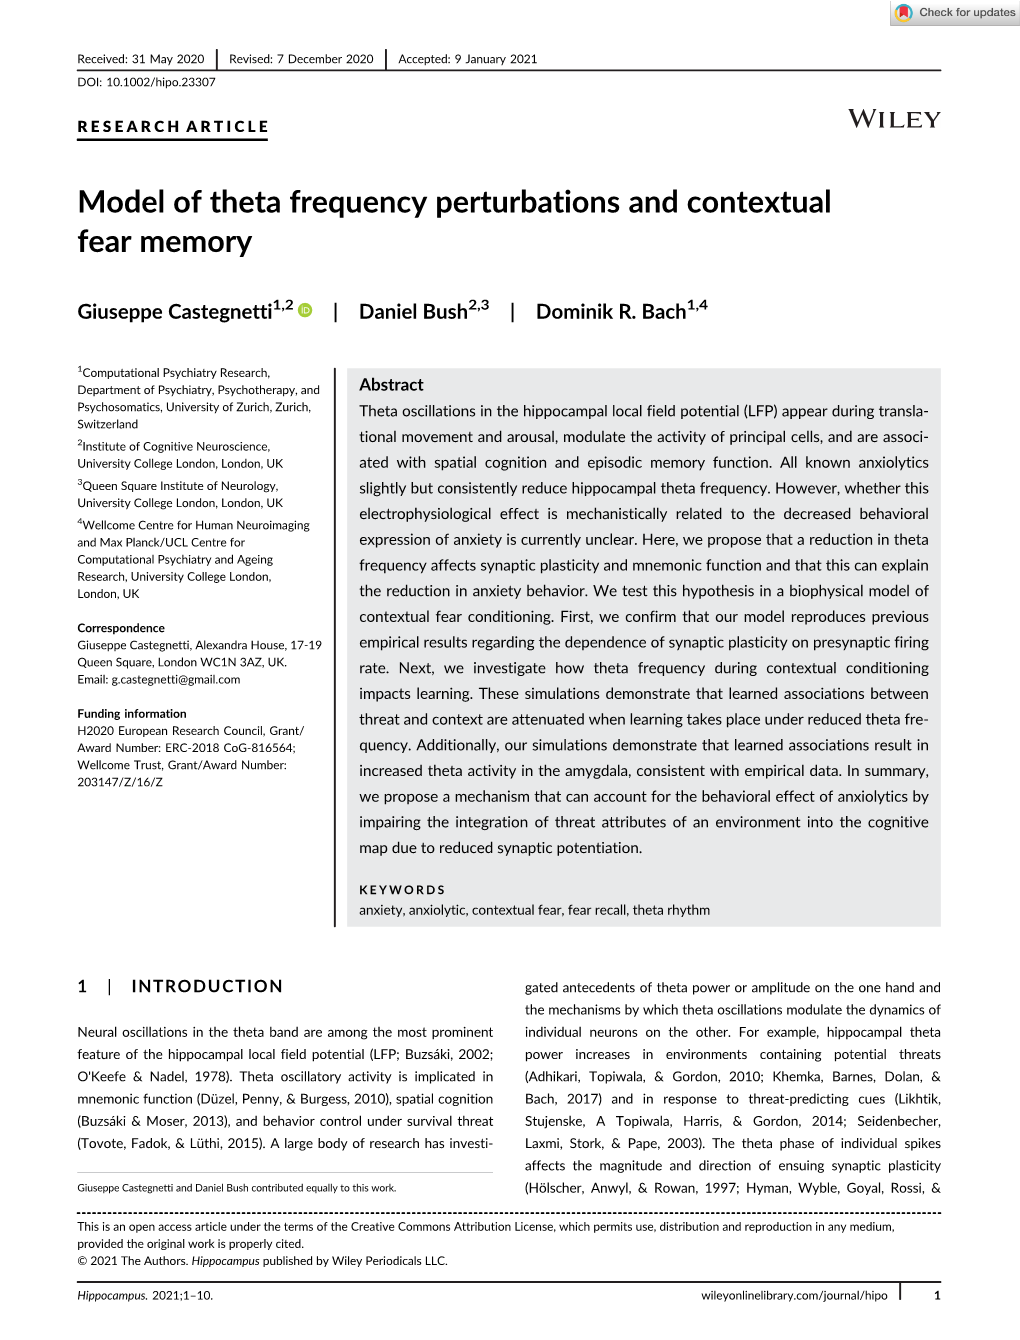 Model of Theta Frequency Perturbations and Contextual Fear Memory